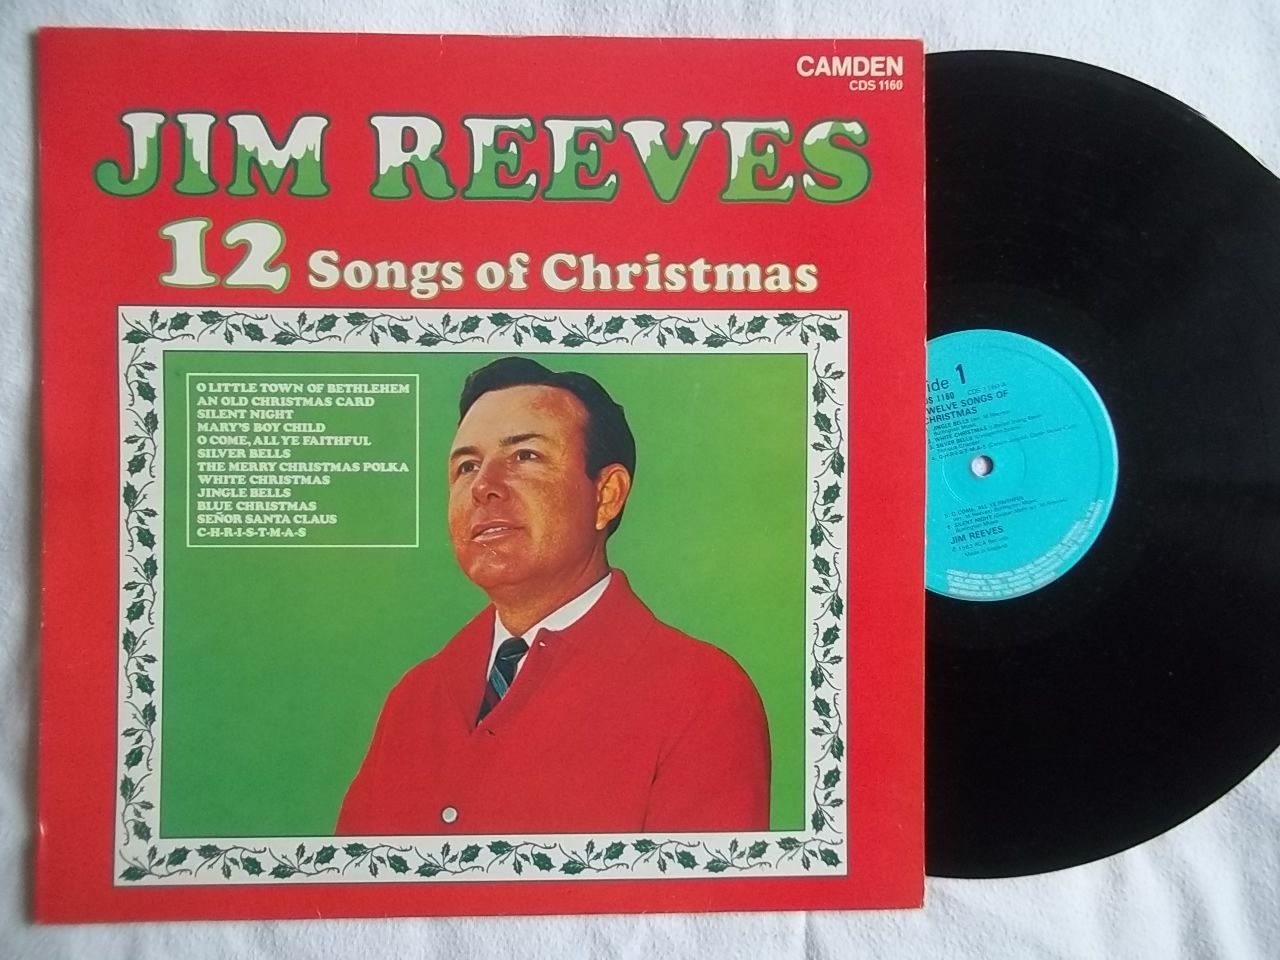 Jim Reeves 12 Songs Of Christmas Records, LPs, Vinyl and CDs - MusicStack